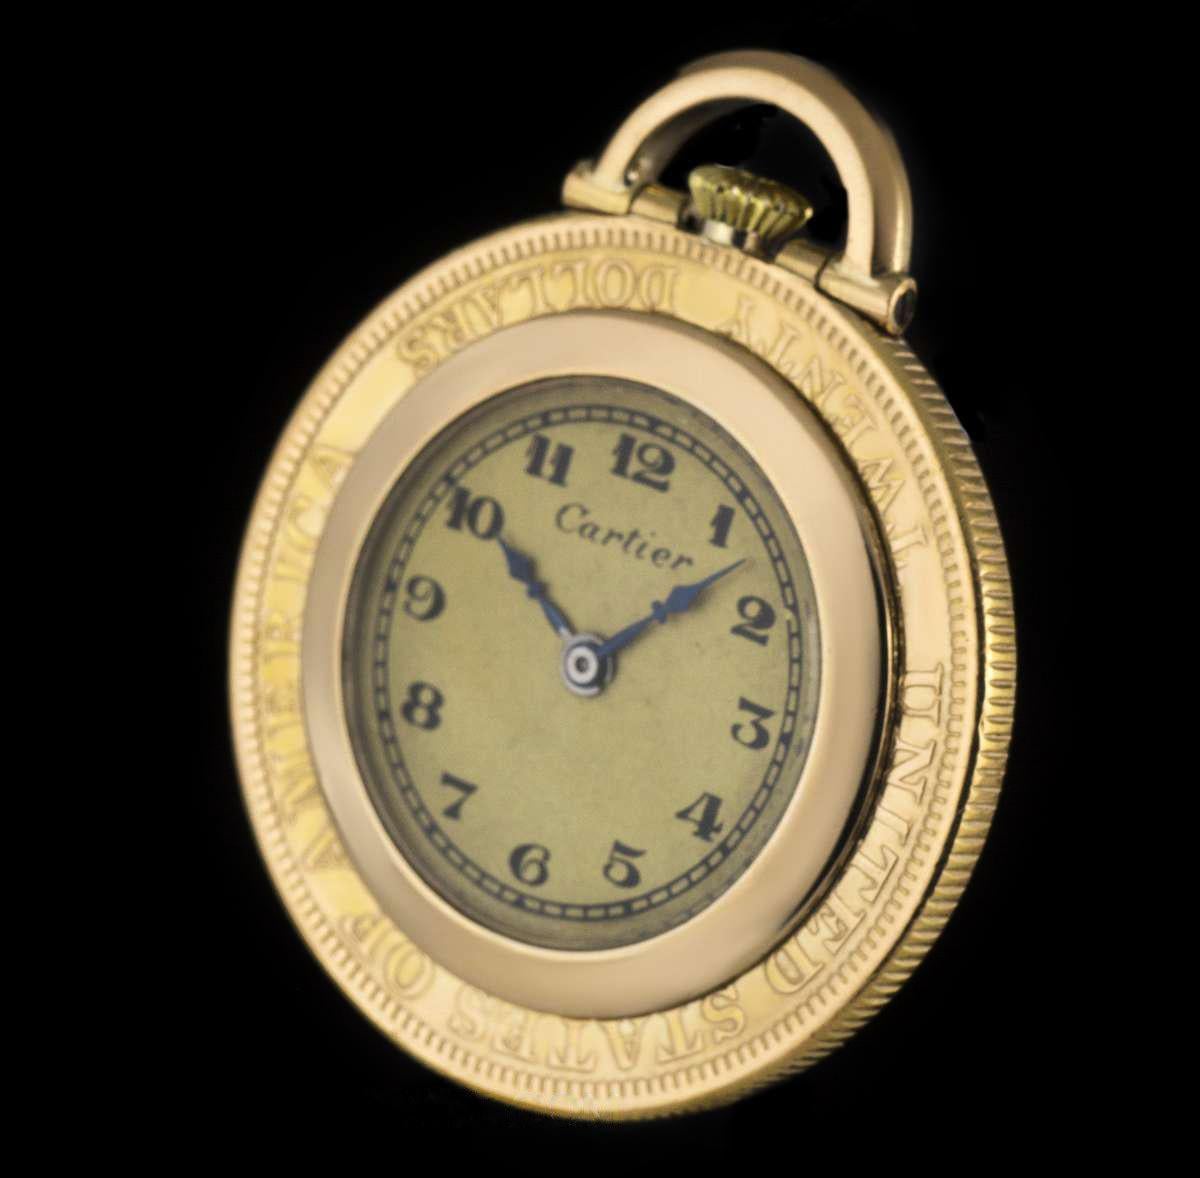 An 18k Yellow Gold Twenty Dollar Coin Pendant Pocket Watch, cream dial with arabic numbers and minute railtrack on the outer edge of the dial, a polished 18k yellow gold fixed bezel, outer bezel embossed with 